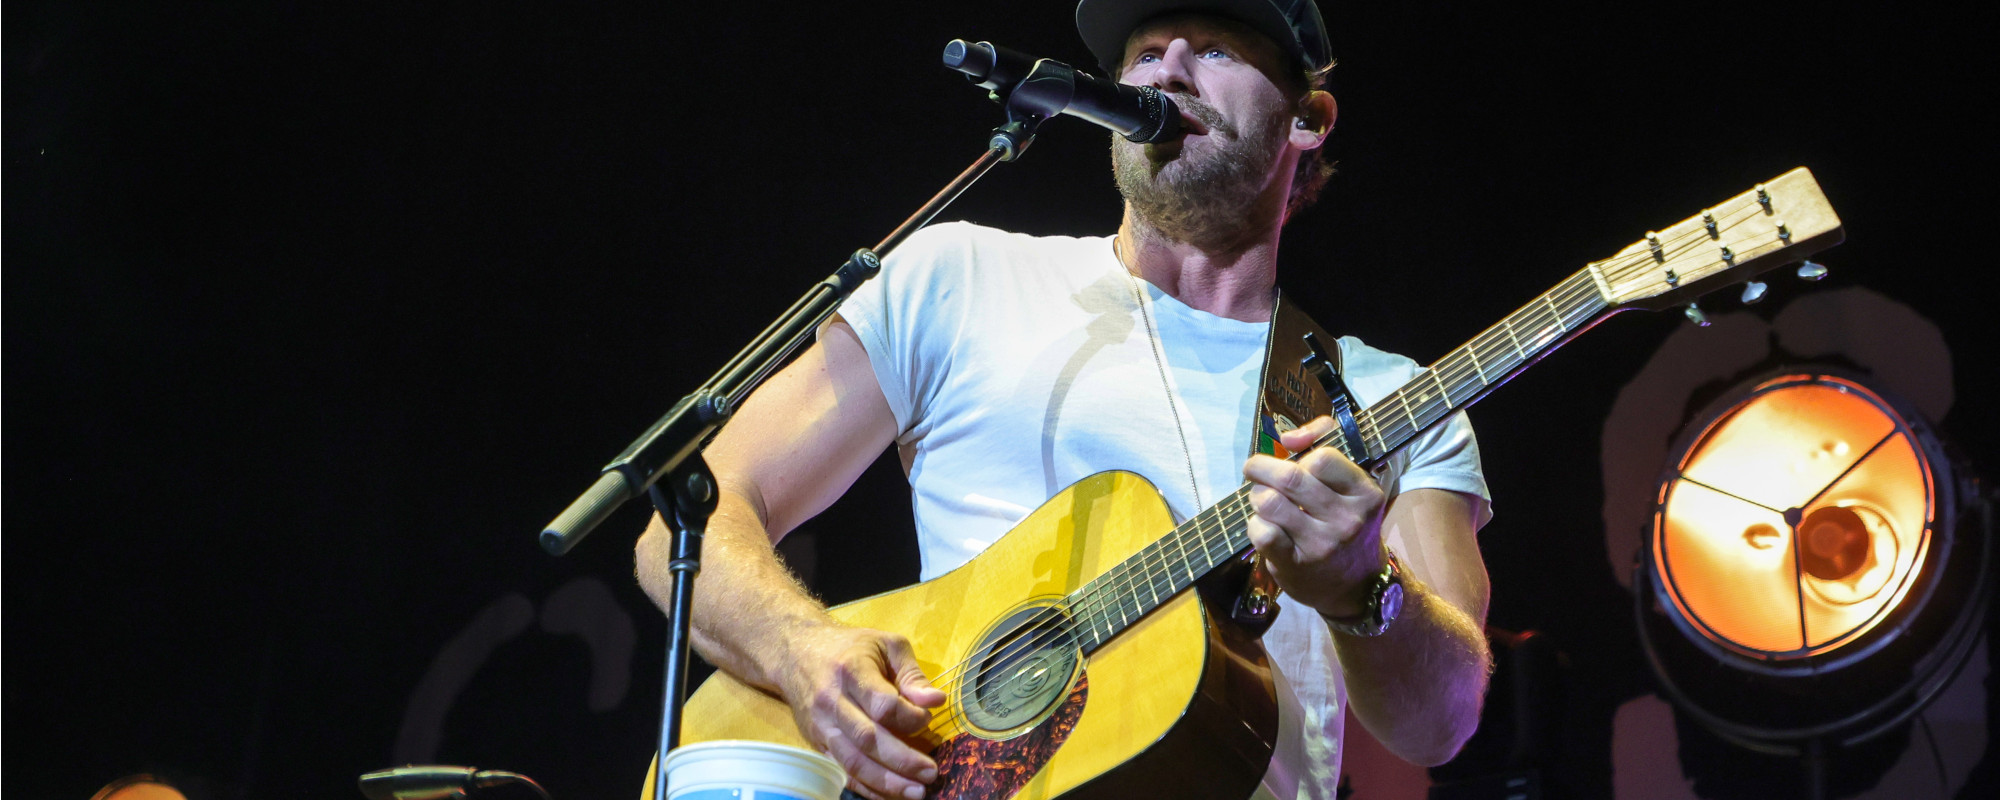 Fan Gifts Chase Rice’s Dog a Squeaky Toy on Stage—and He Steals the Show